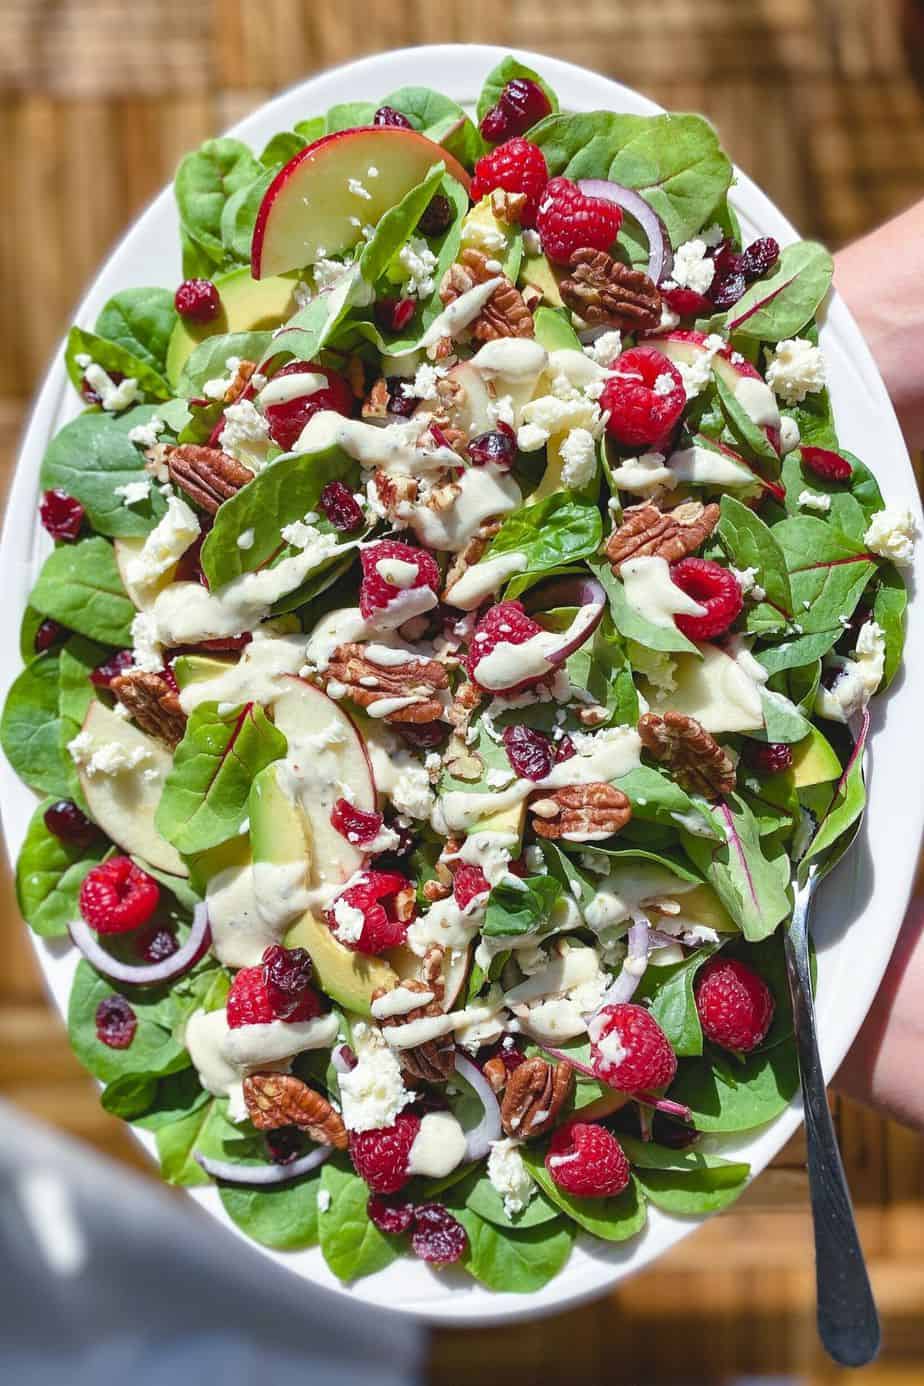 Raspberry, Spinach, and Beet Green Salad - healthy, summer salad recipe loaded with raspberries, pecans, fresh spinach, feta, and beet leaves. This recipe uses just a few ingredients and is simply delicious on its own. But what makes this salad unforgettably delicious is the Creamy Greek Yogurt Herb Dressing. - The Yummy Bowl